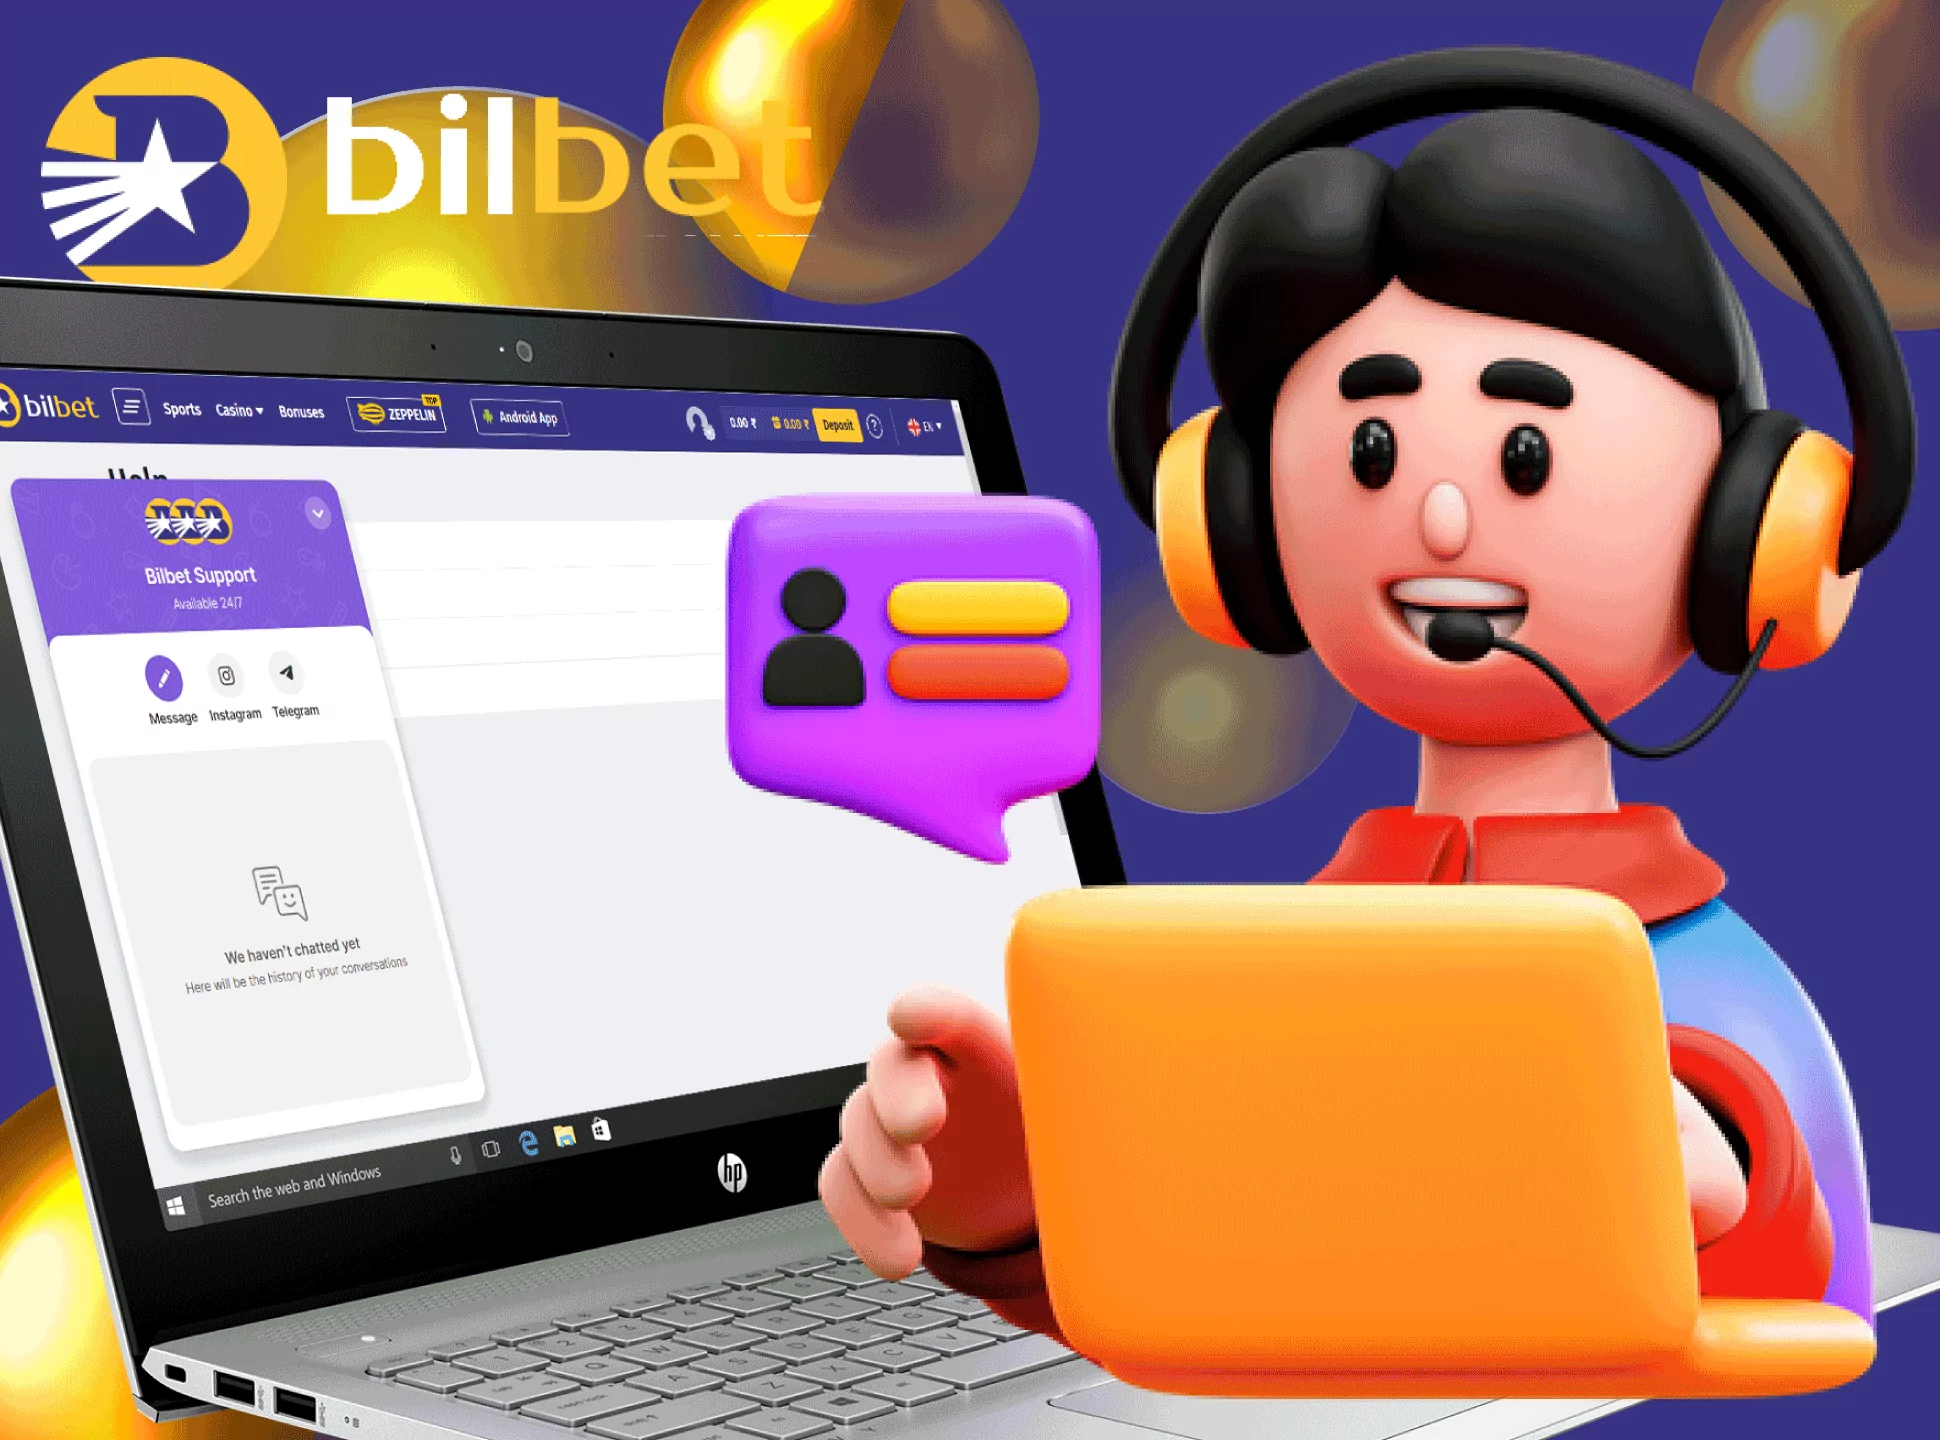 The Bilbet support team is always ready to help its customers.